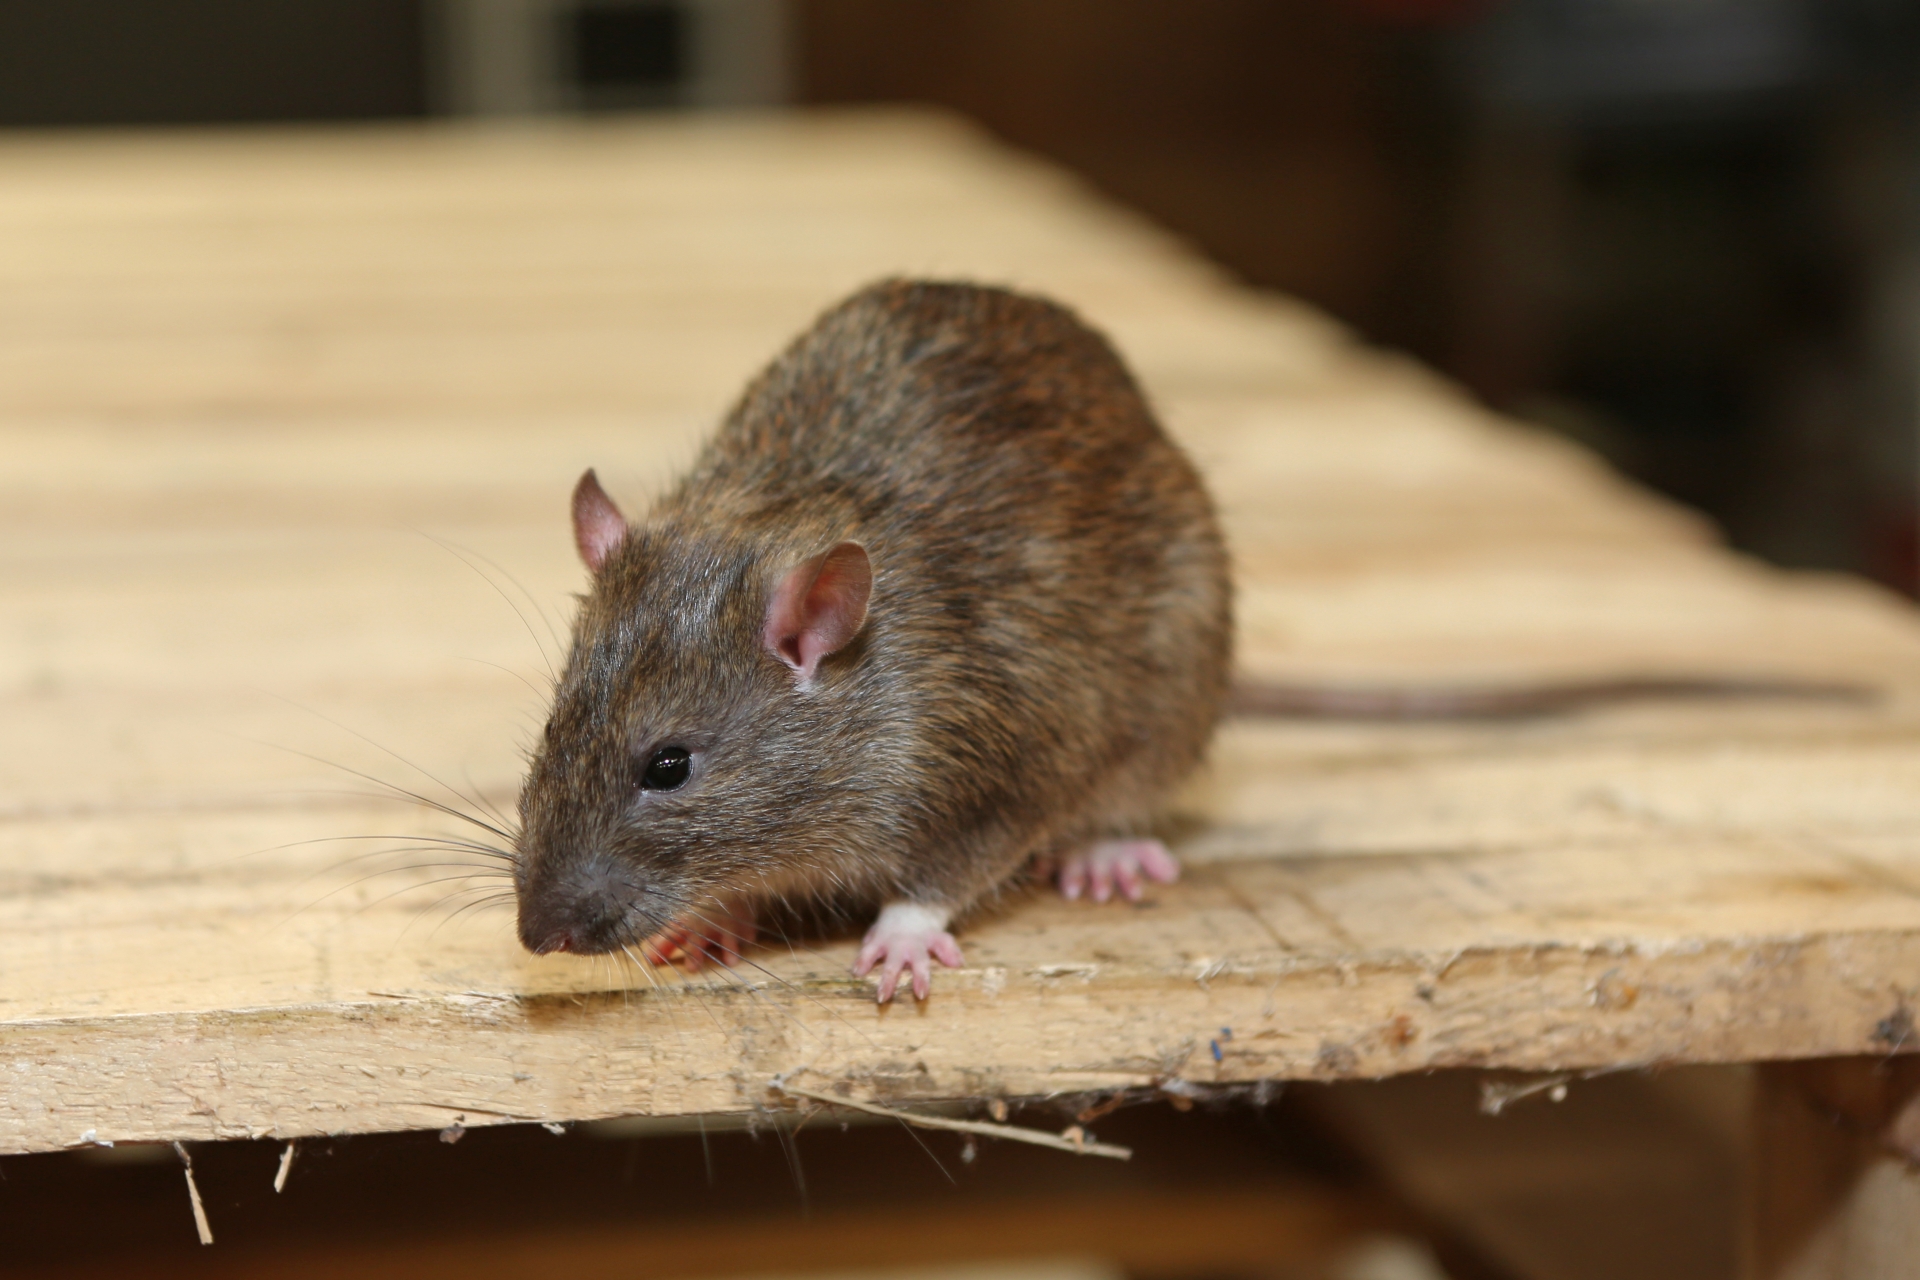 Rat extermination, Pest Control in South Lambeth, SW8. Call Now 020 8166 9746